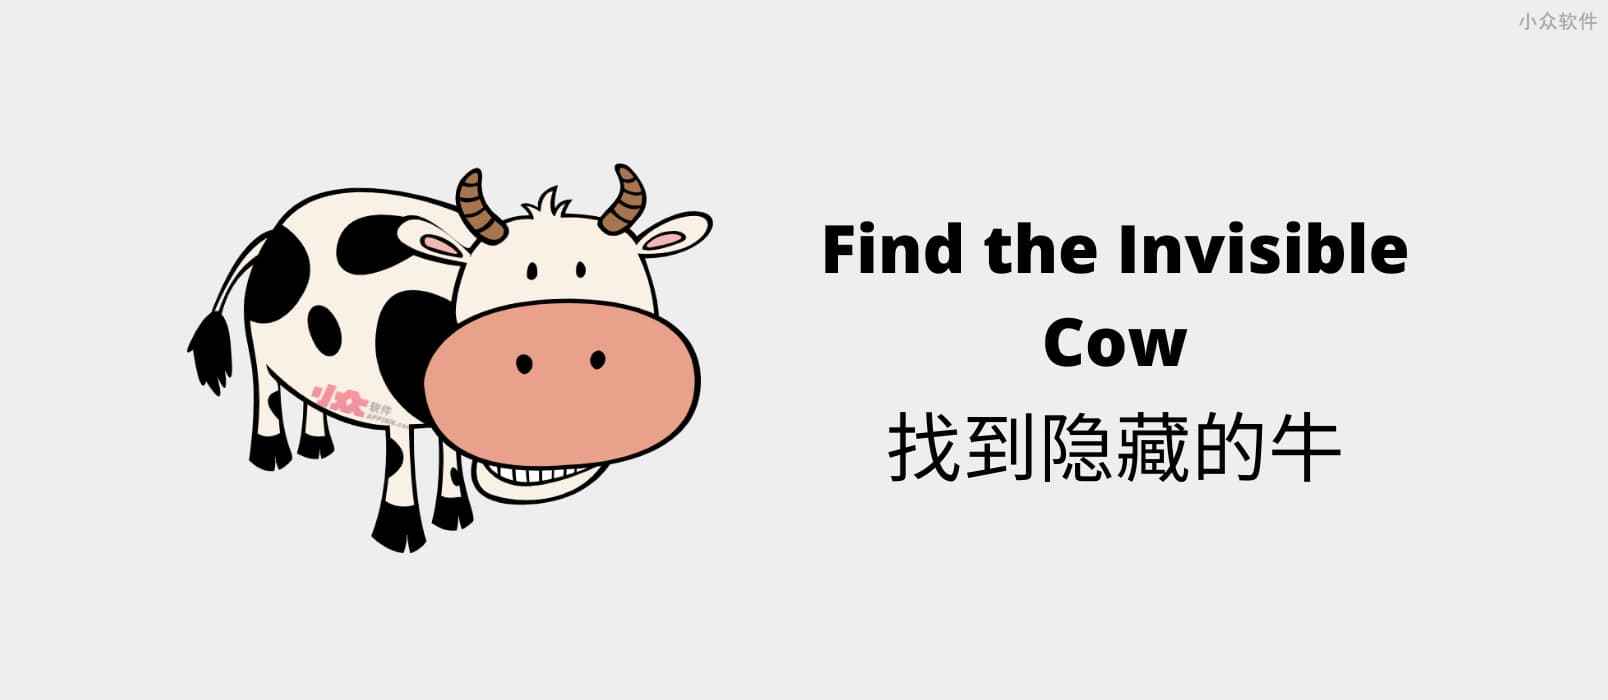 Find the Invisible Cow – 找到隐藏的牛，鼠标距离越近，它叫的越响[Web]